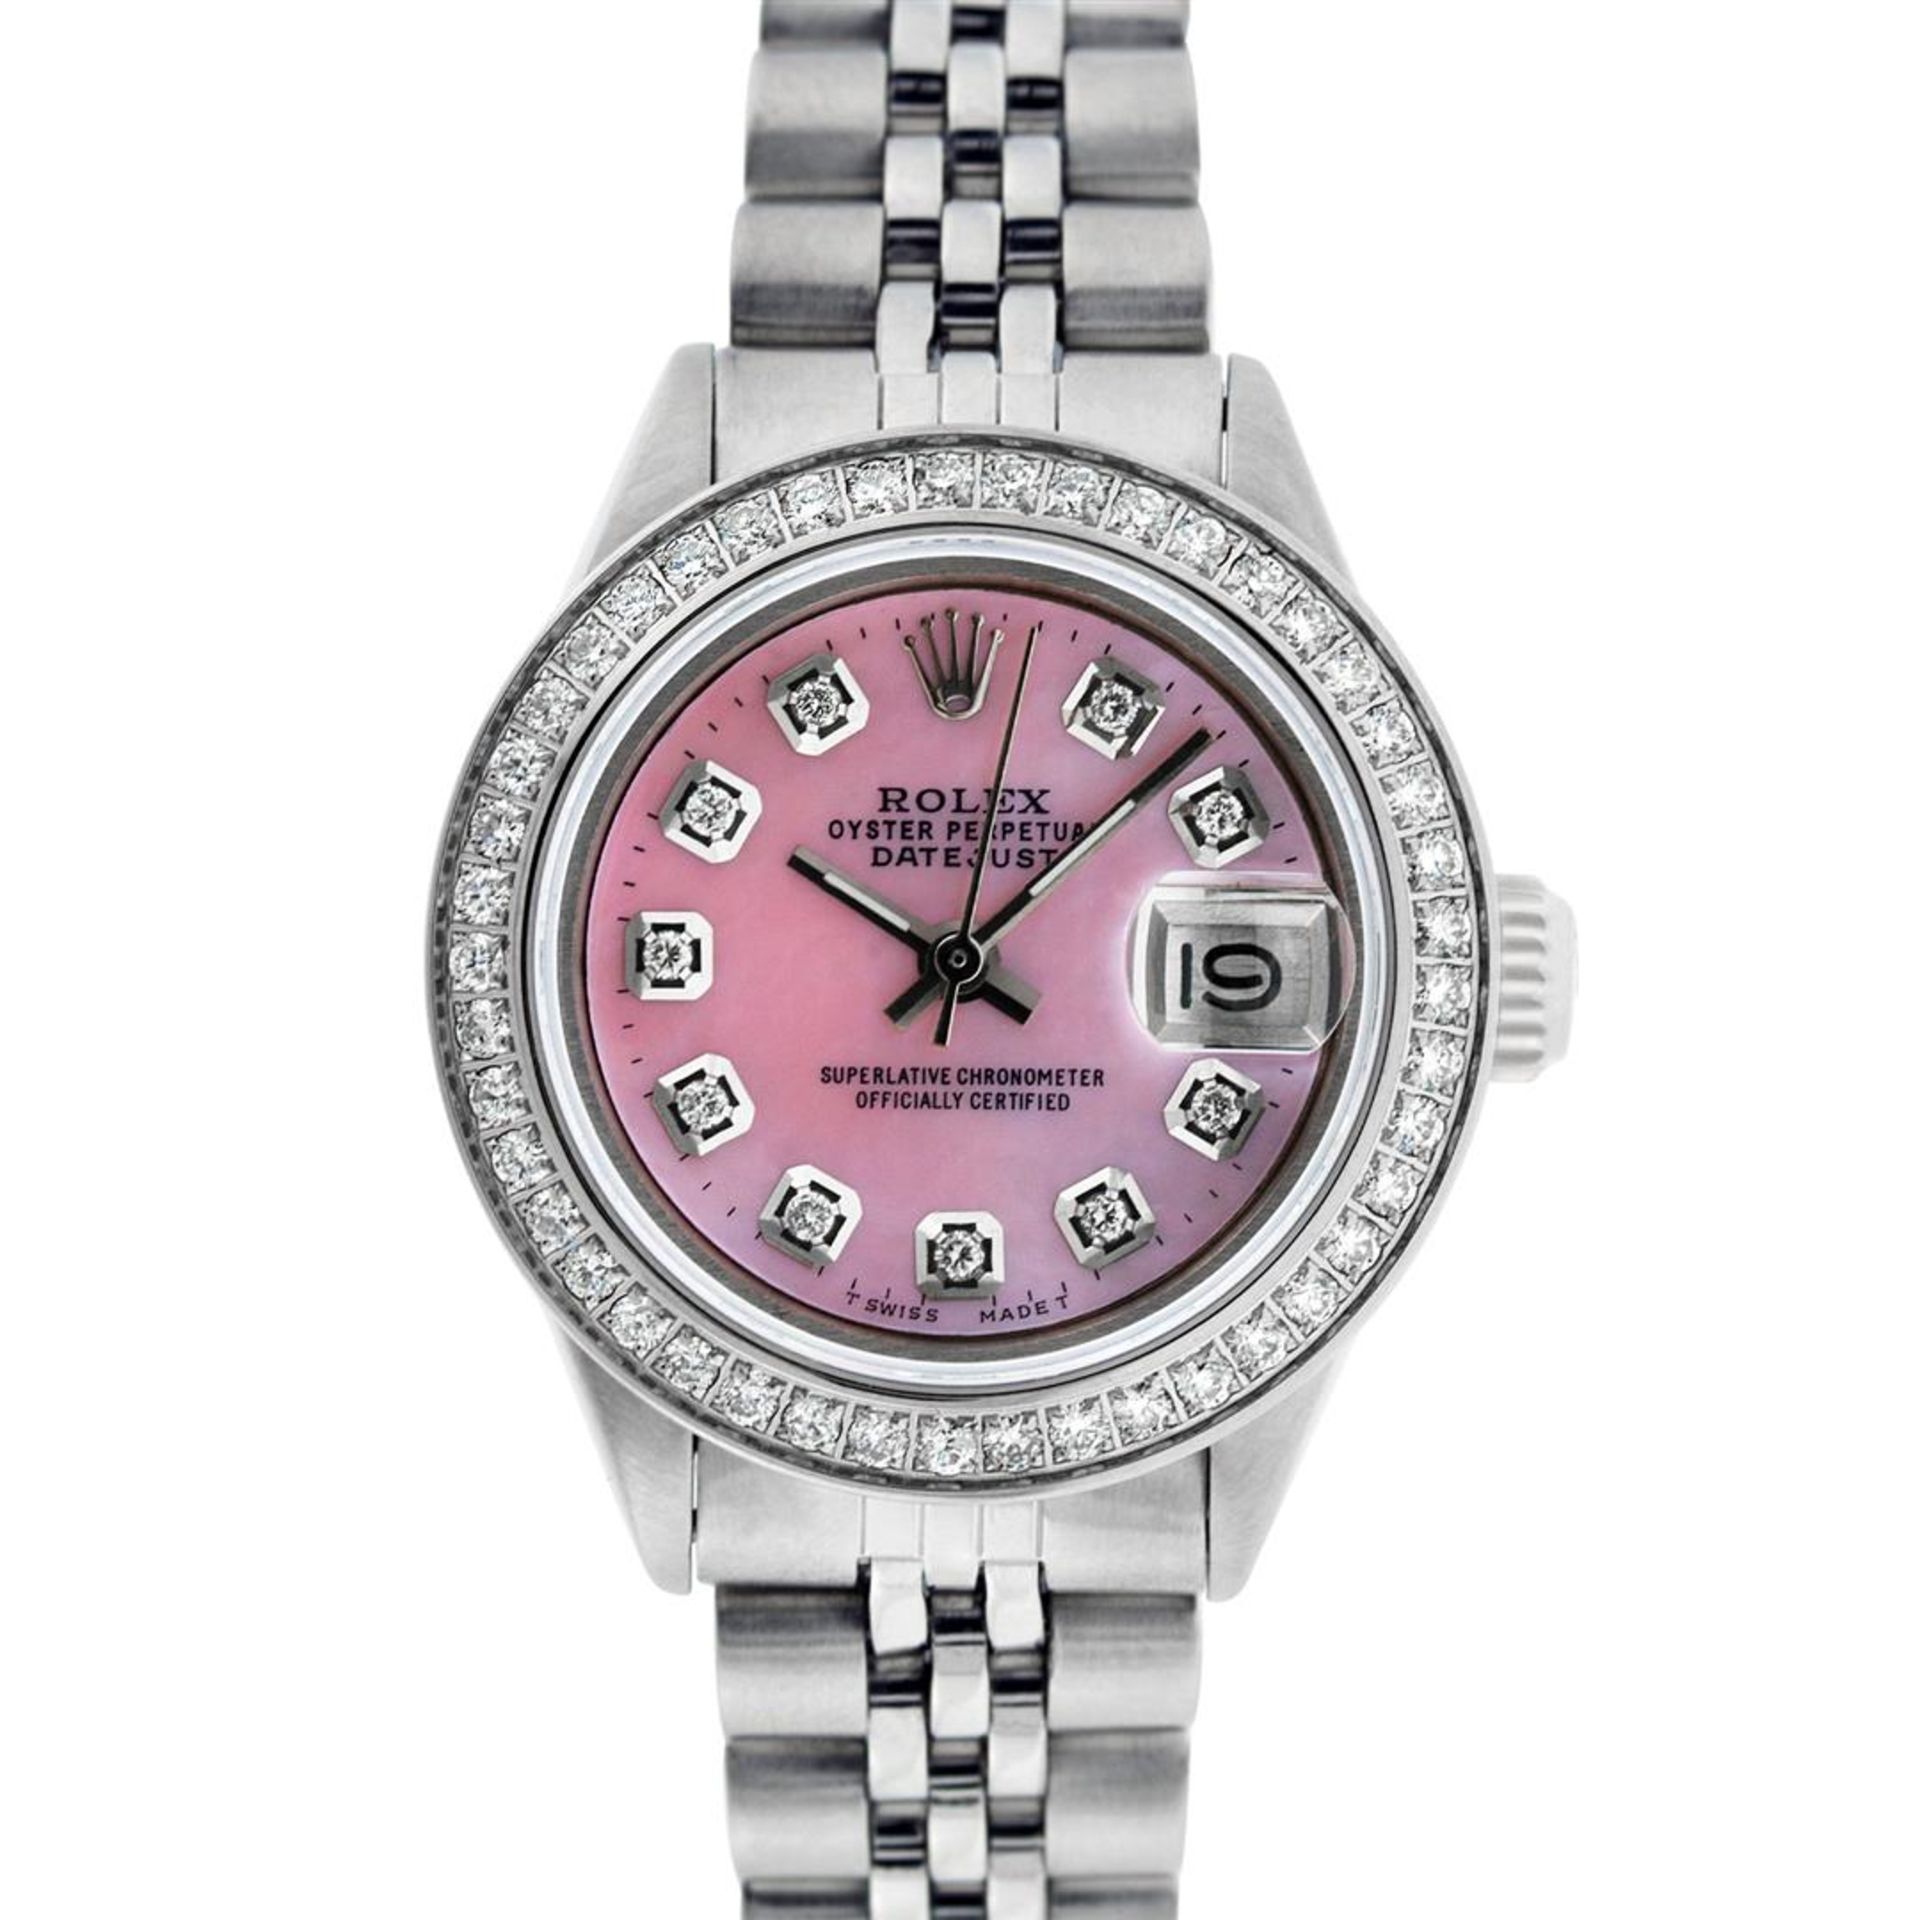 Rolex Ladies 26 Stainless Steel Pink MOP Diamond Datejust Wriwatch - Image 2 of 8